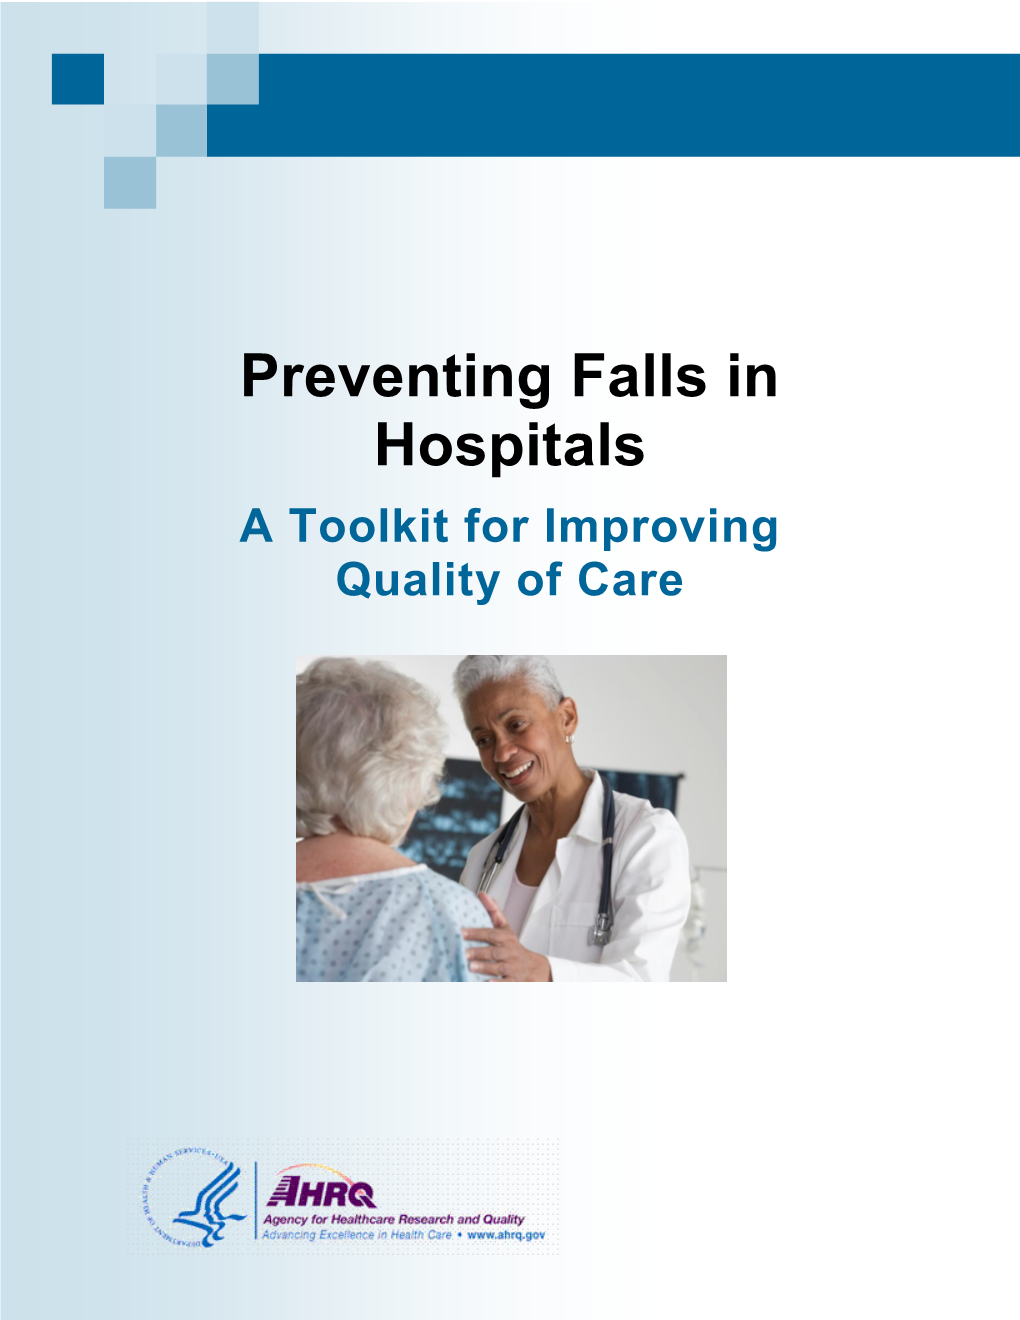 Preventing Falls in Hospitals: a Toolkit for Improving Quality of Care